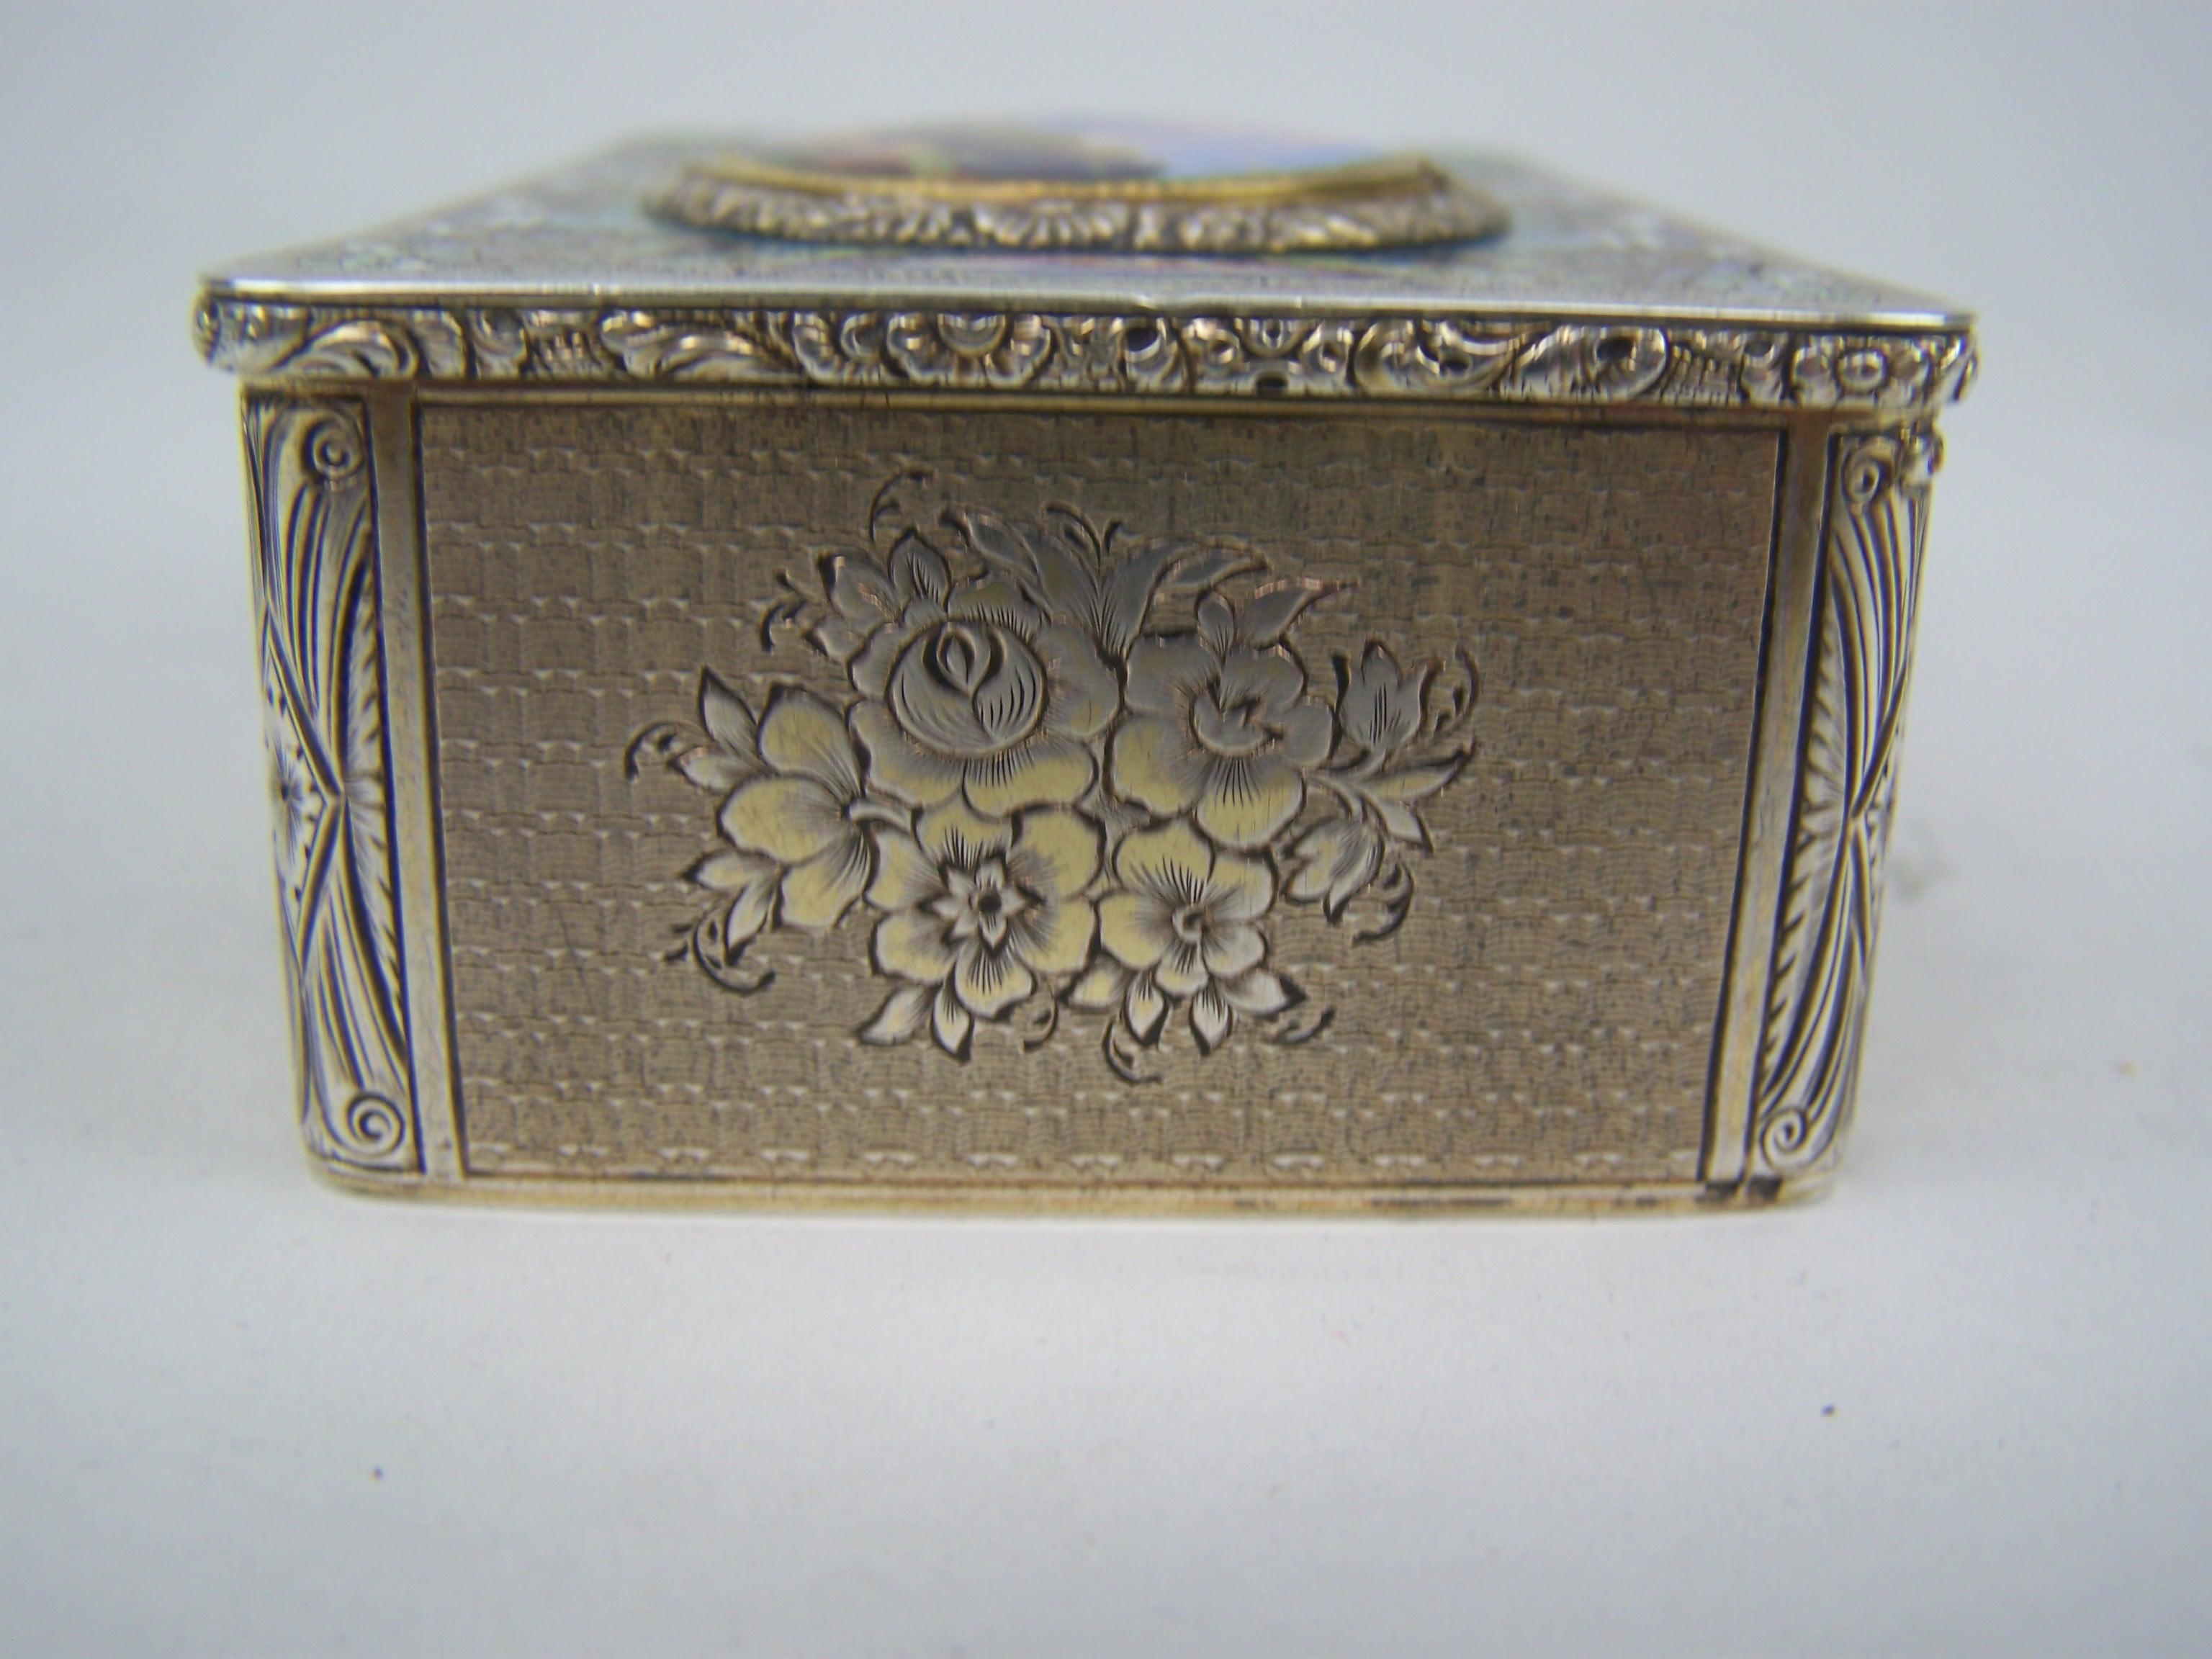 Metal Singing bird box by Bruguier in silver case with enamel to top and lid For Sale